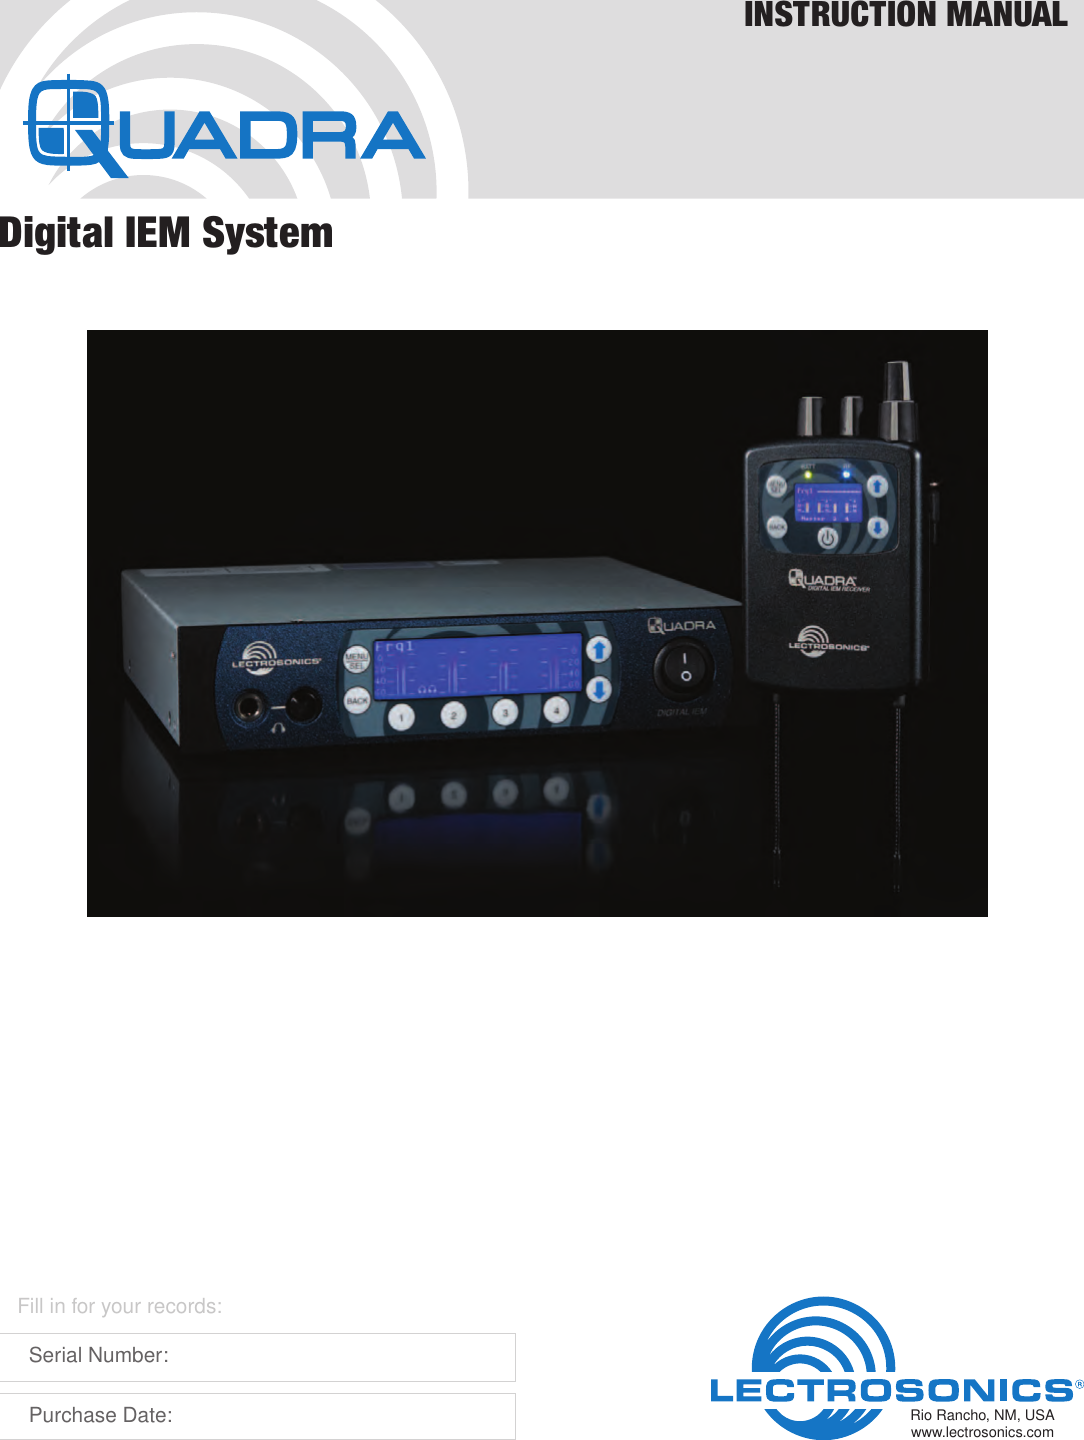 Digital IEM SystemINSTRUCTION MANUALRio Rancho, NM, USAwww.lectrosonics.comFill in for your records:  Serial Number:  Purchase Date: